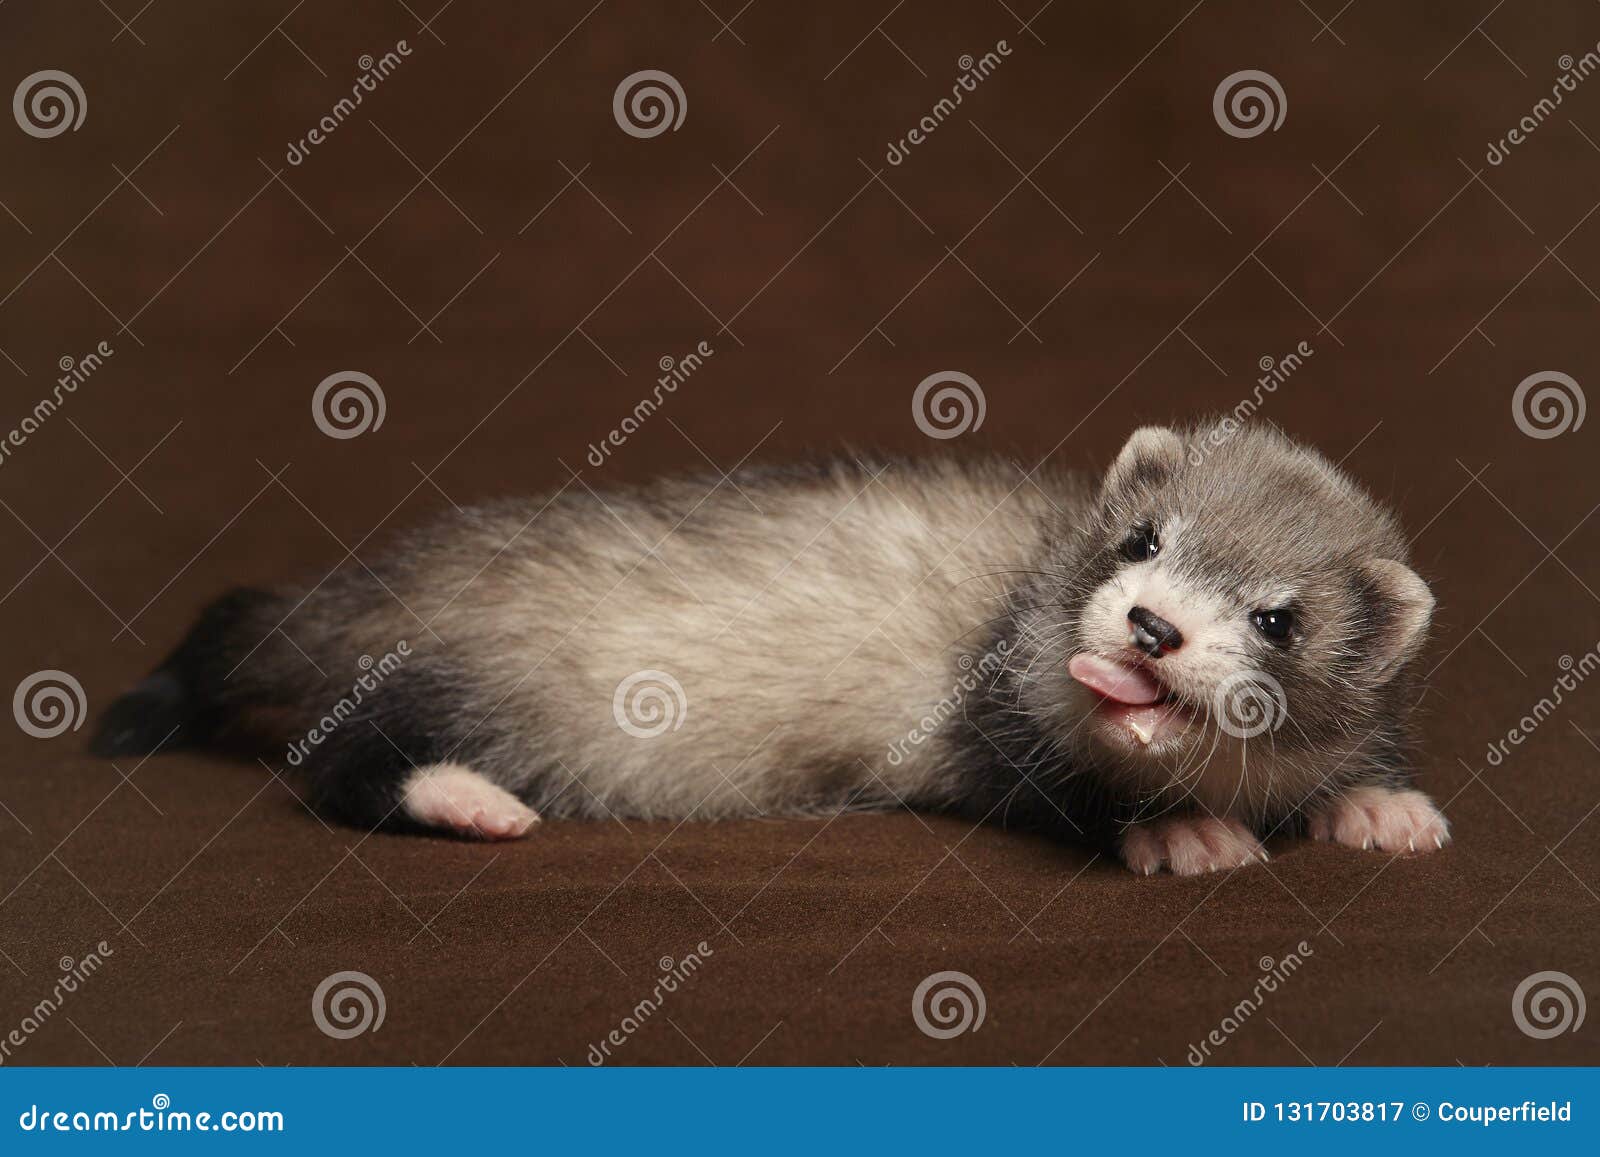 Dark Sable Young Ferret Baby Laying In Studio Stock Image Image Of Looking Little 131703817